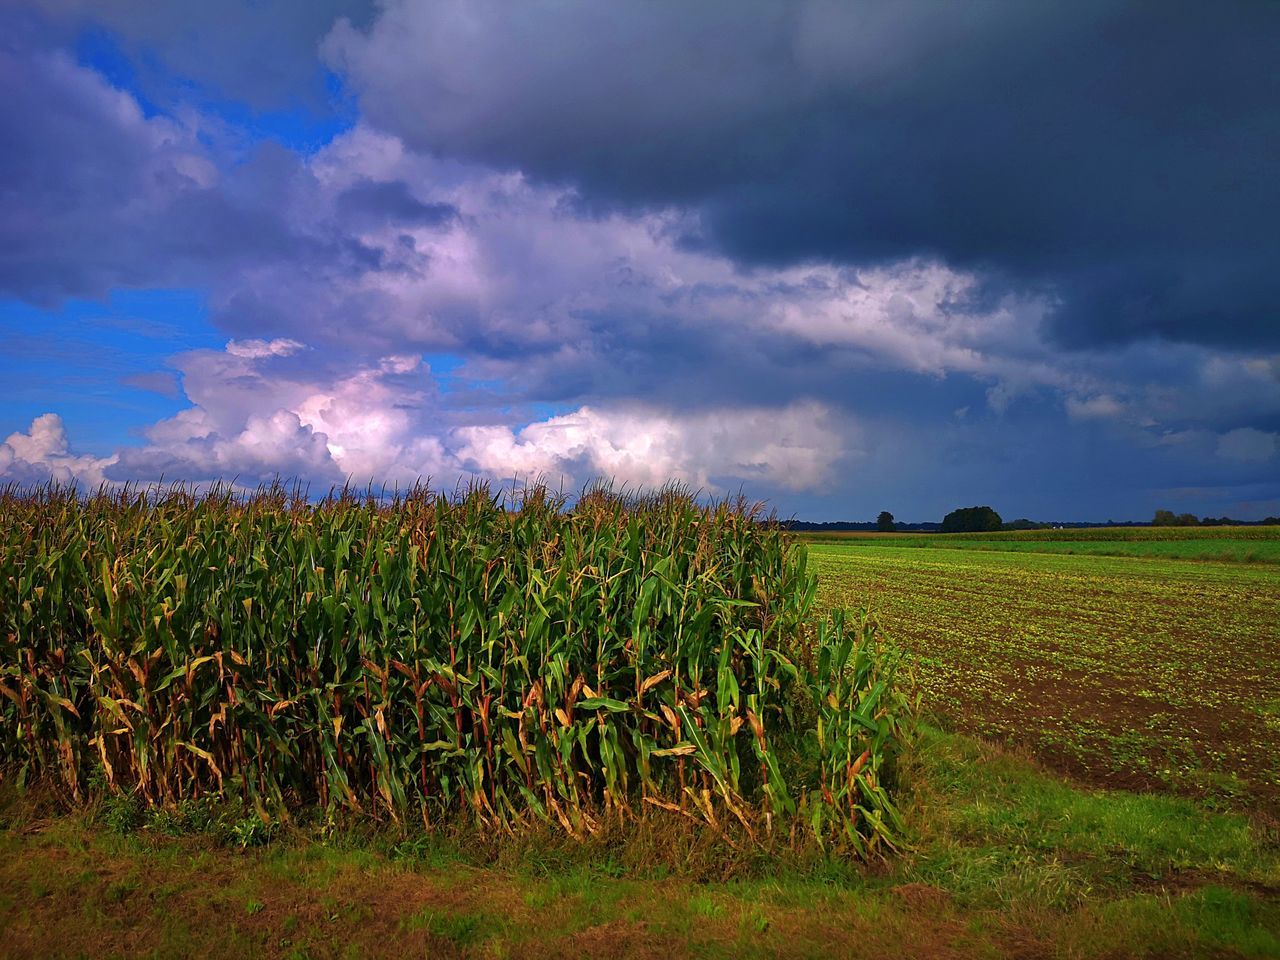 sky, landscape, cloud, field, environment, land, plant, nature, agriculture, crop, rural scene, horizon, grass, food, growth, cereal plant, food and drink, grassland, beauty in nature, morning, scenics - nature, soil, corn, rural area, prairie, sunlight, plain, no people, farm, tree, dramatic sky, outdoors, storm, meadow, vegetable, blue, cloudscape, dusk, green, social issues, storm cloud, horizon over land, tranquility, flower, environmental conservation, freshness